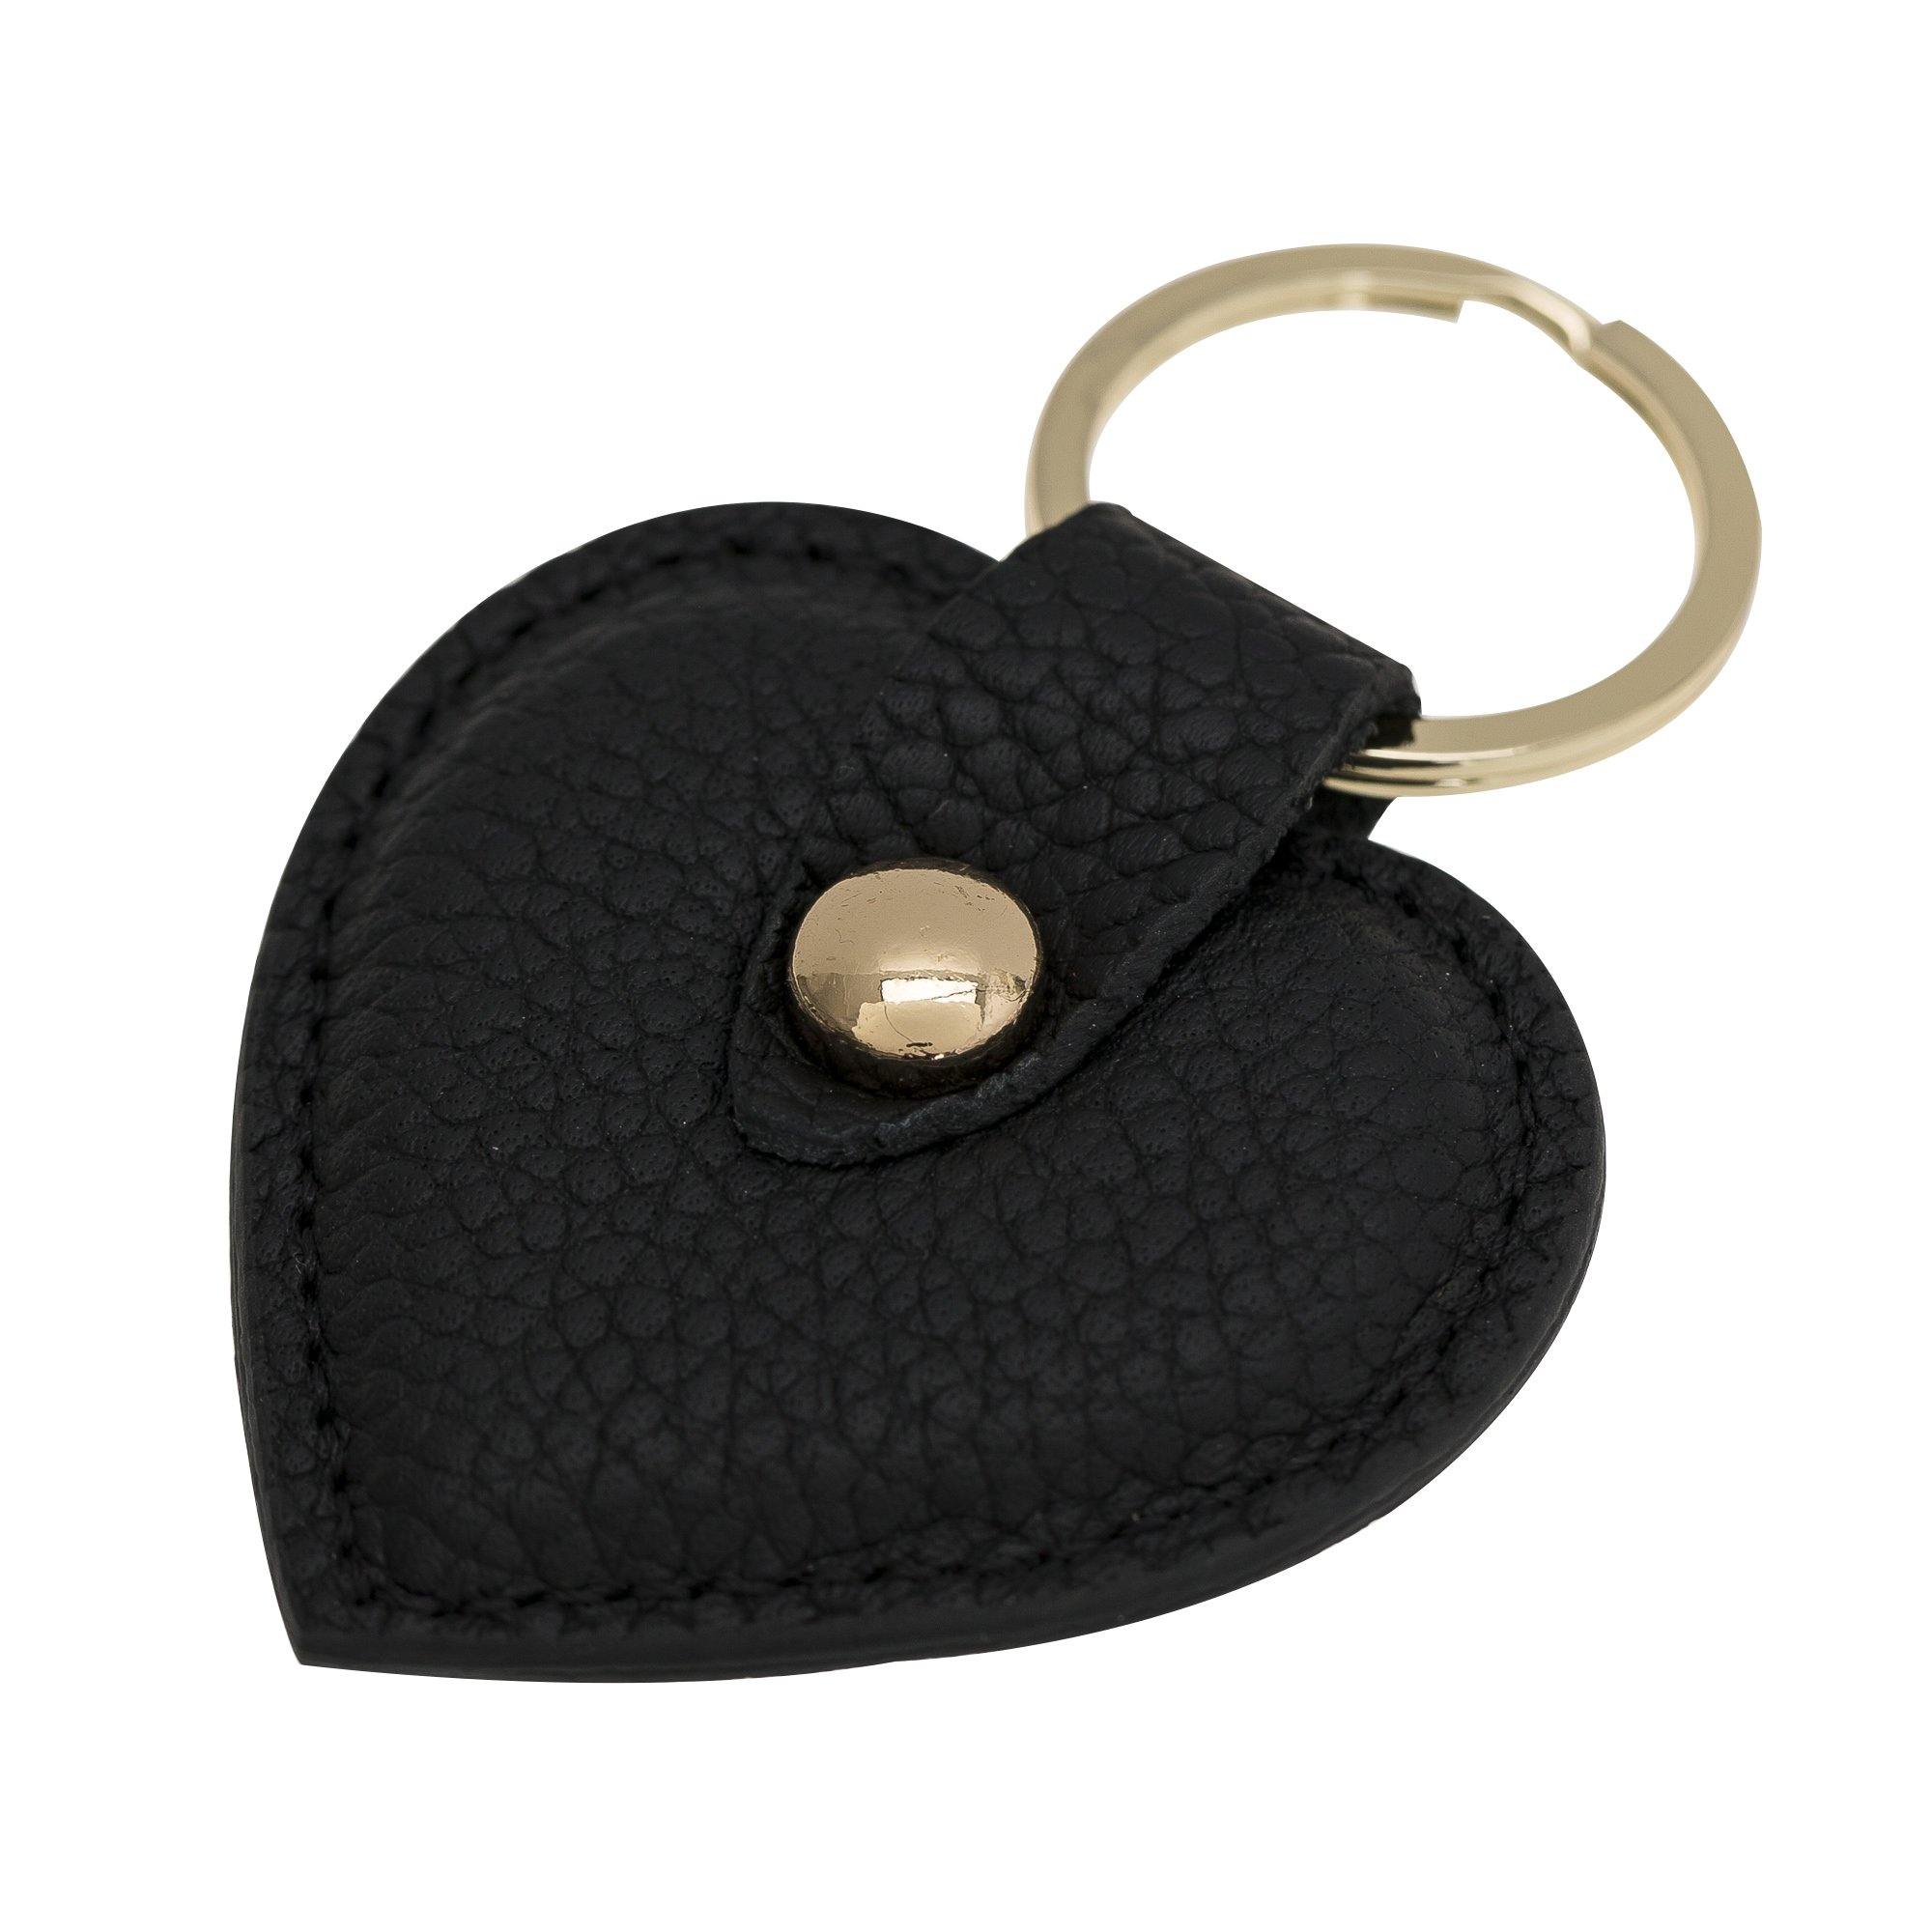 Black leather heart keyring with gold hardware personalised with gold letters - PersonalisebyLisa